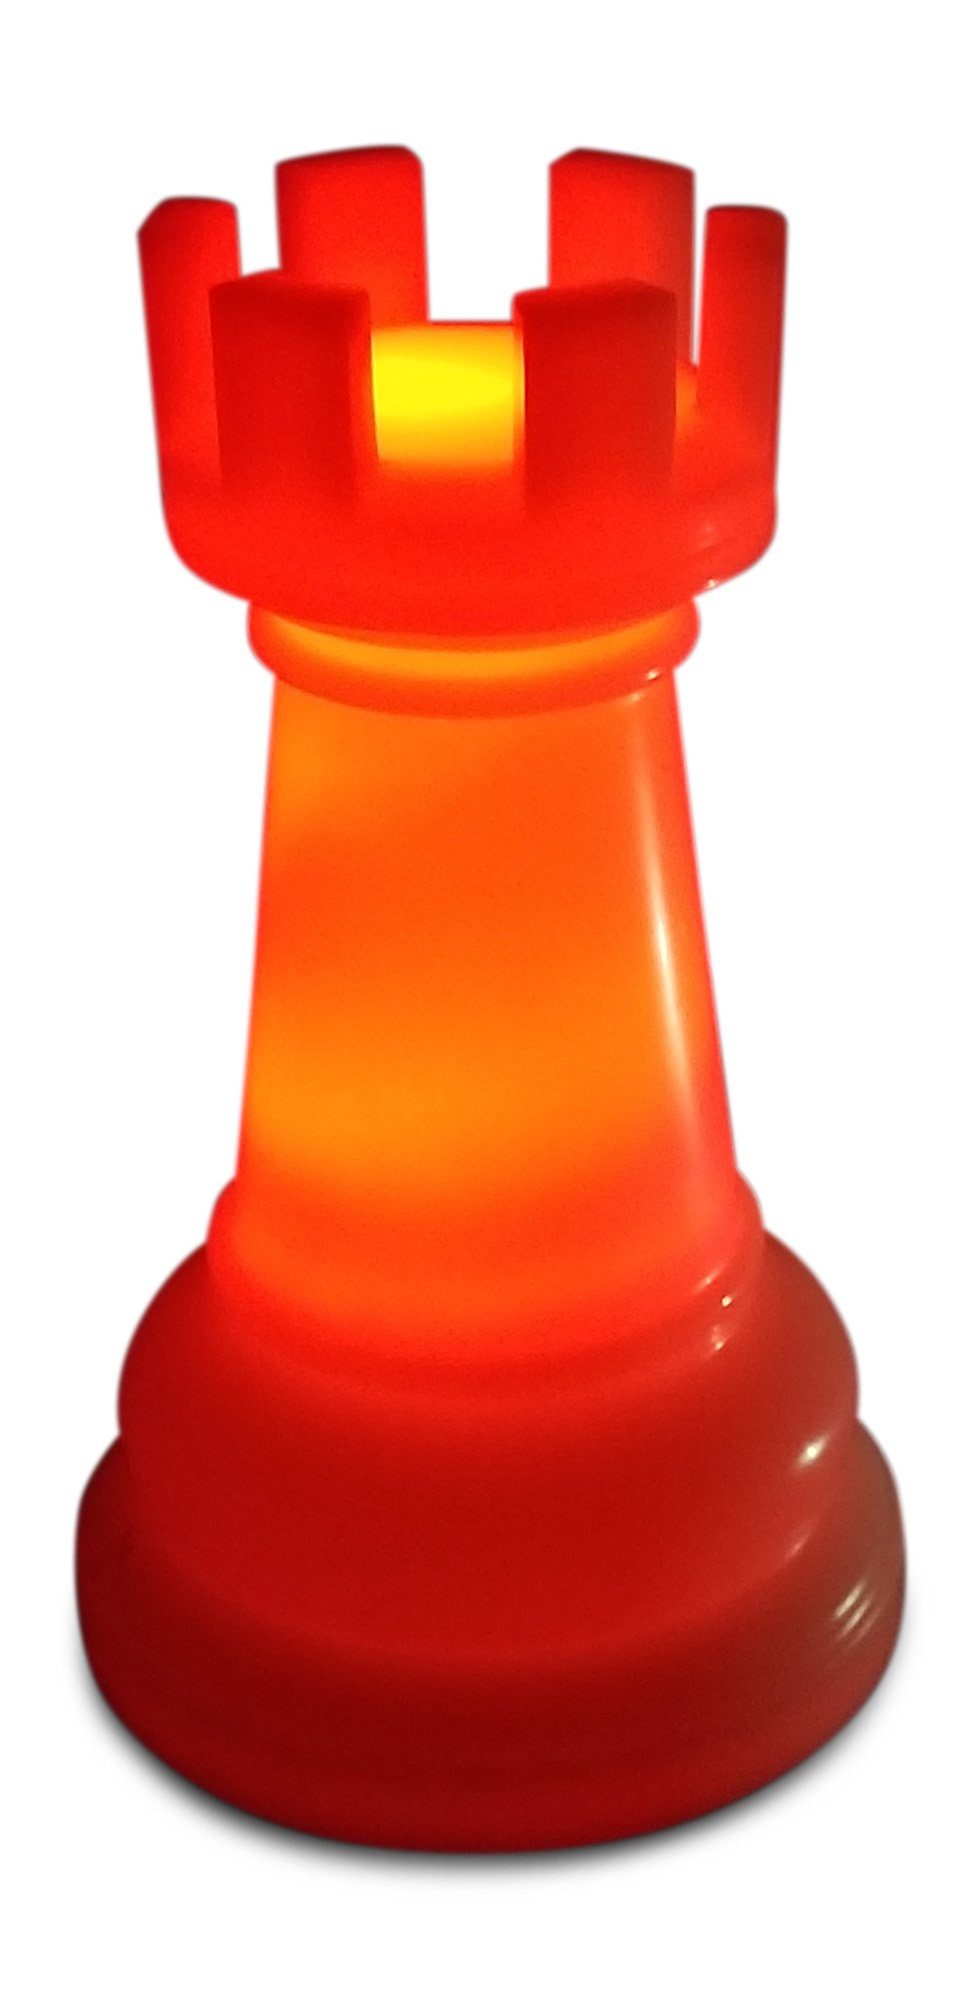 Lighthouse Rook is latest Next Wave chess piece